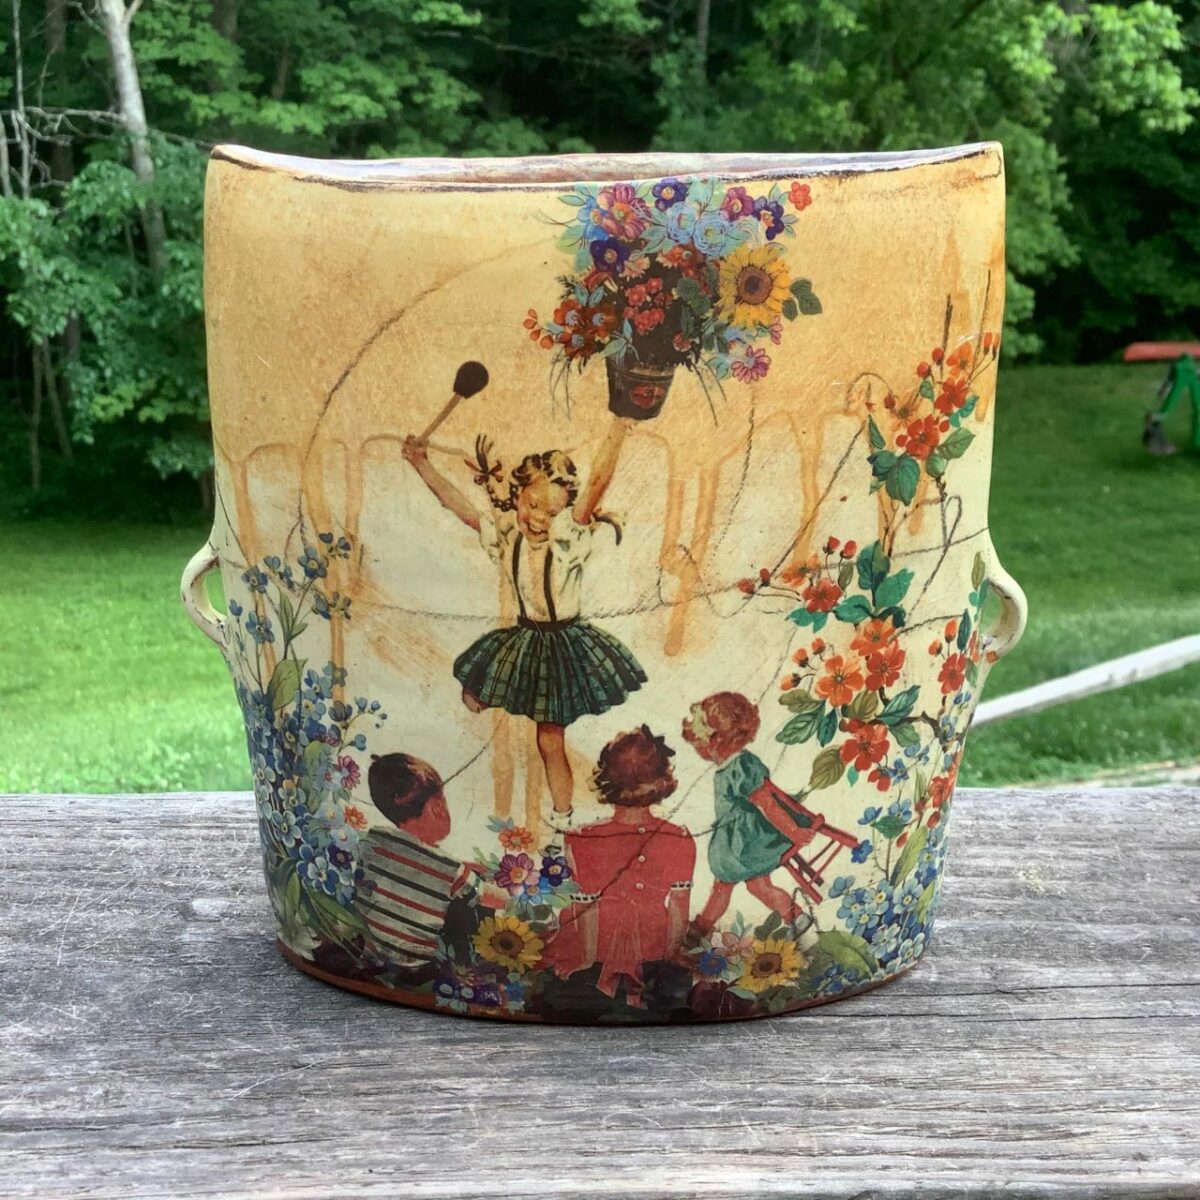 Gorgeous Earthenware Vessels Decorated With Vintage Imagery By Eric Pardue (16)